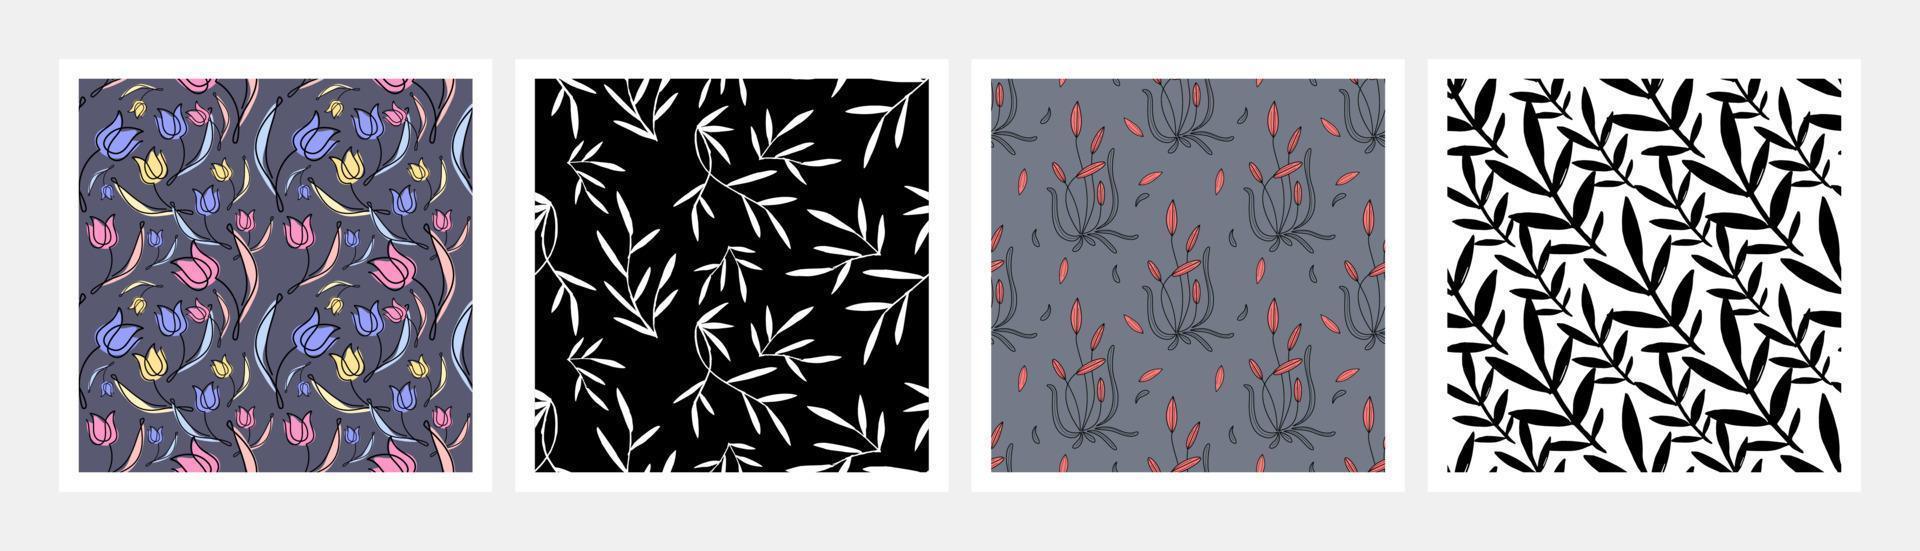 patterns twigs ornament. simple stylish backgrounds in flat style. branches, flowers - vector illustration set. seamless pattern vegetable collection. selection wallpaper decor interior